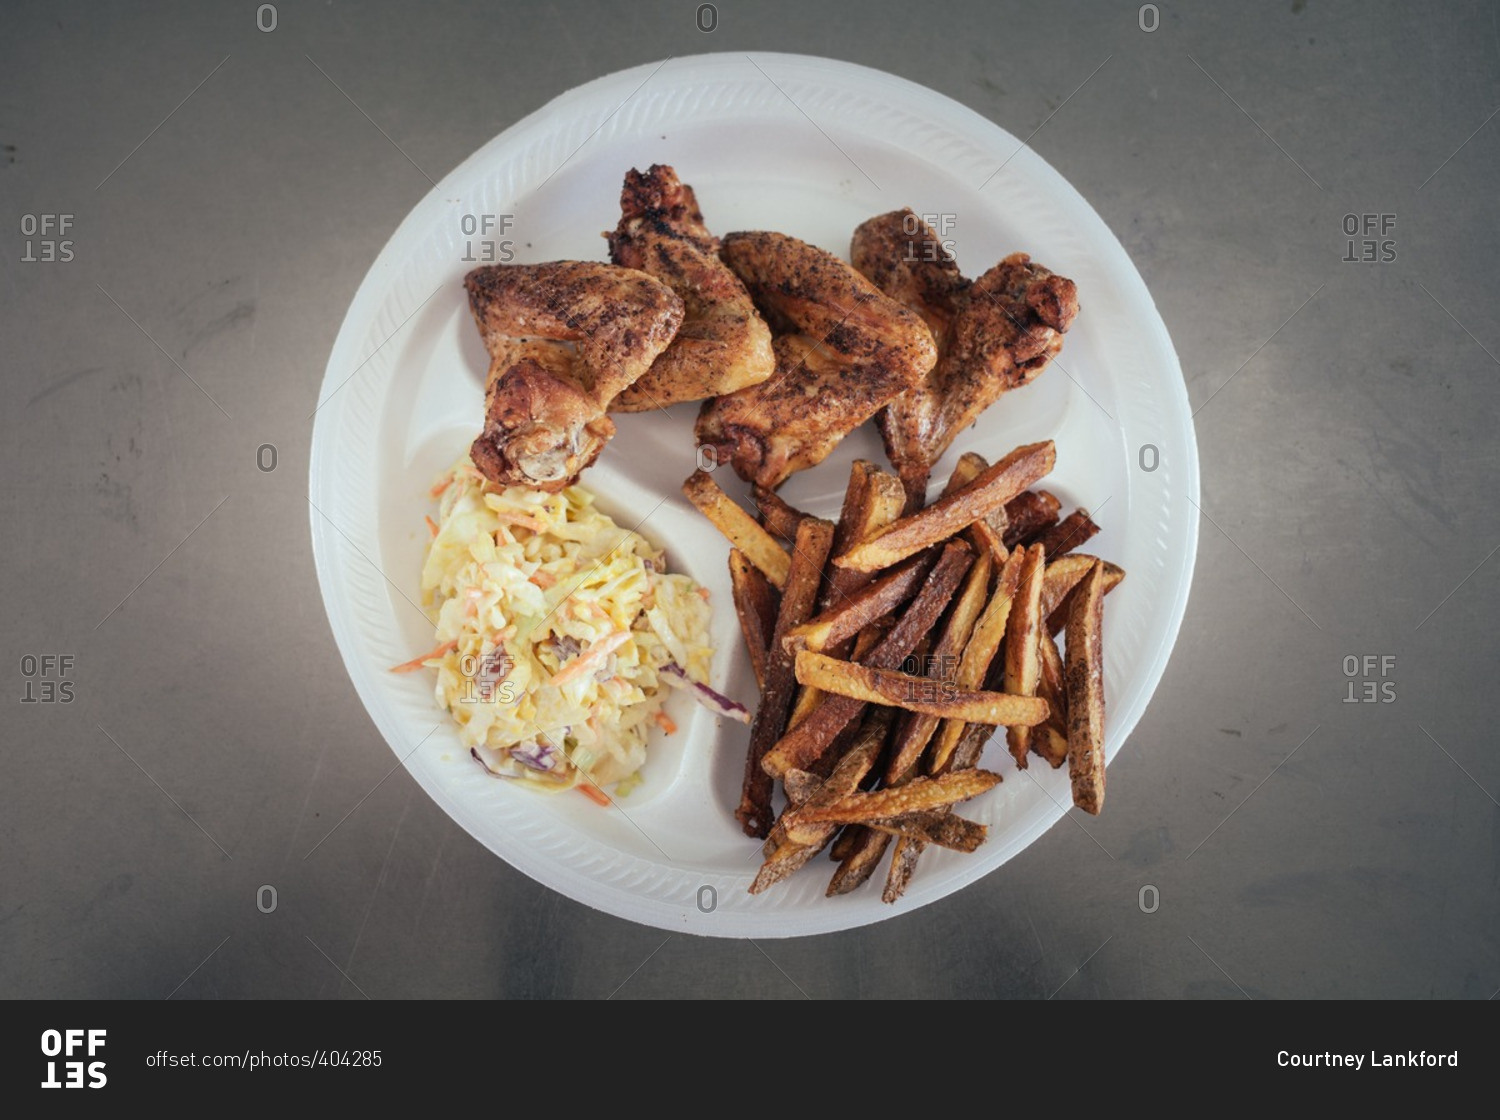 Chicken wings, fries and coleslaw on a disposable plate